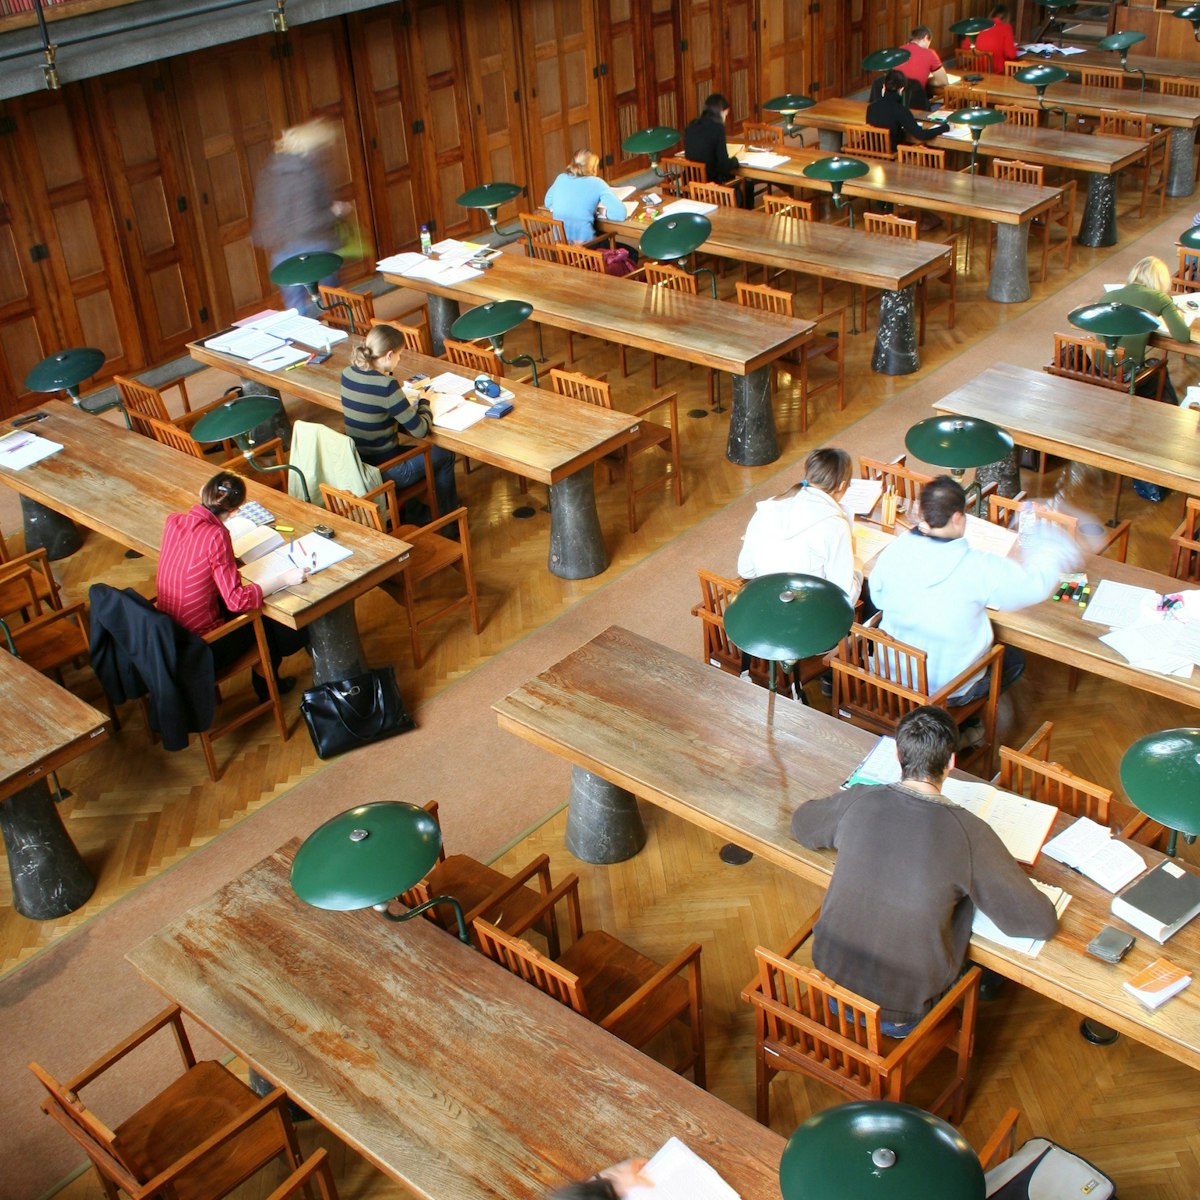 Overhead of main Reading Room at National  University Library.